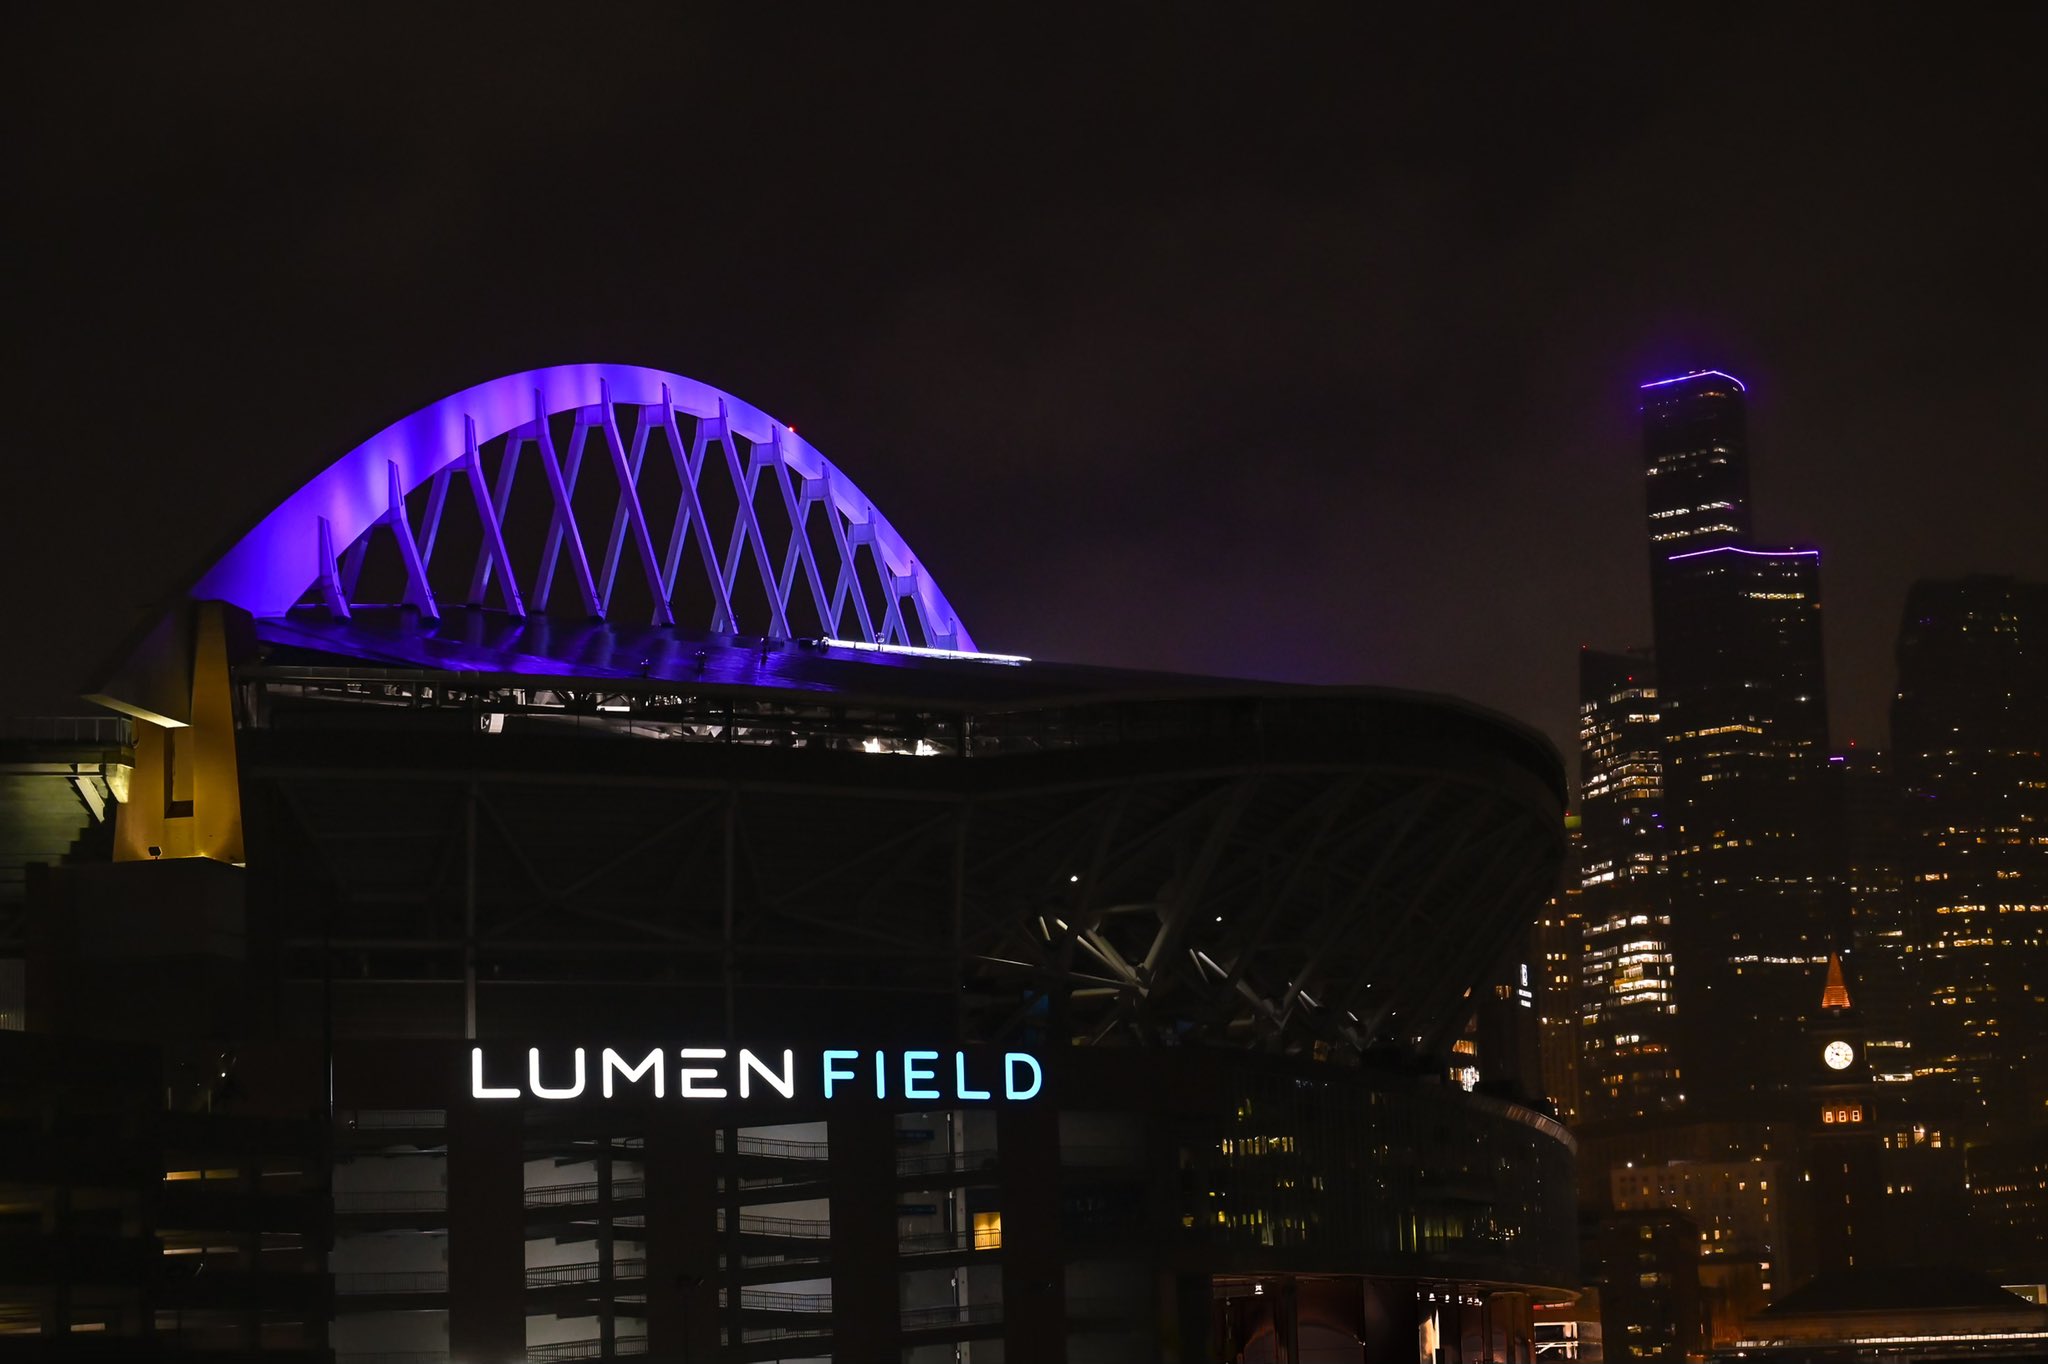 Lumen Field lit up in purple for Domestic Violence Awareness Month; and so did the Columbia Center in the background